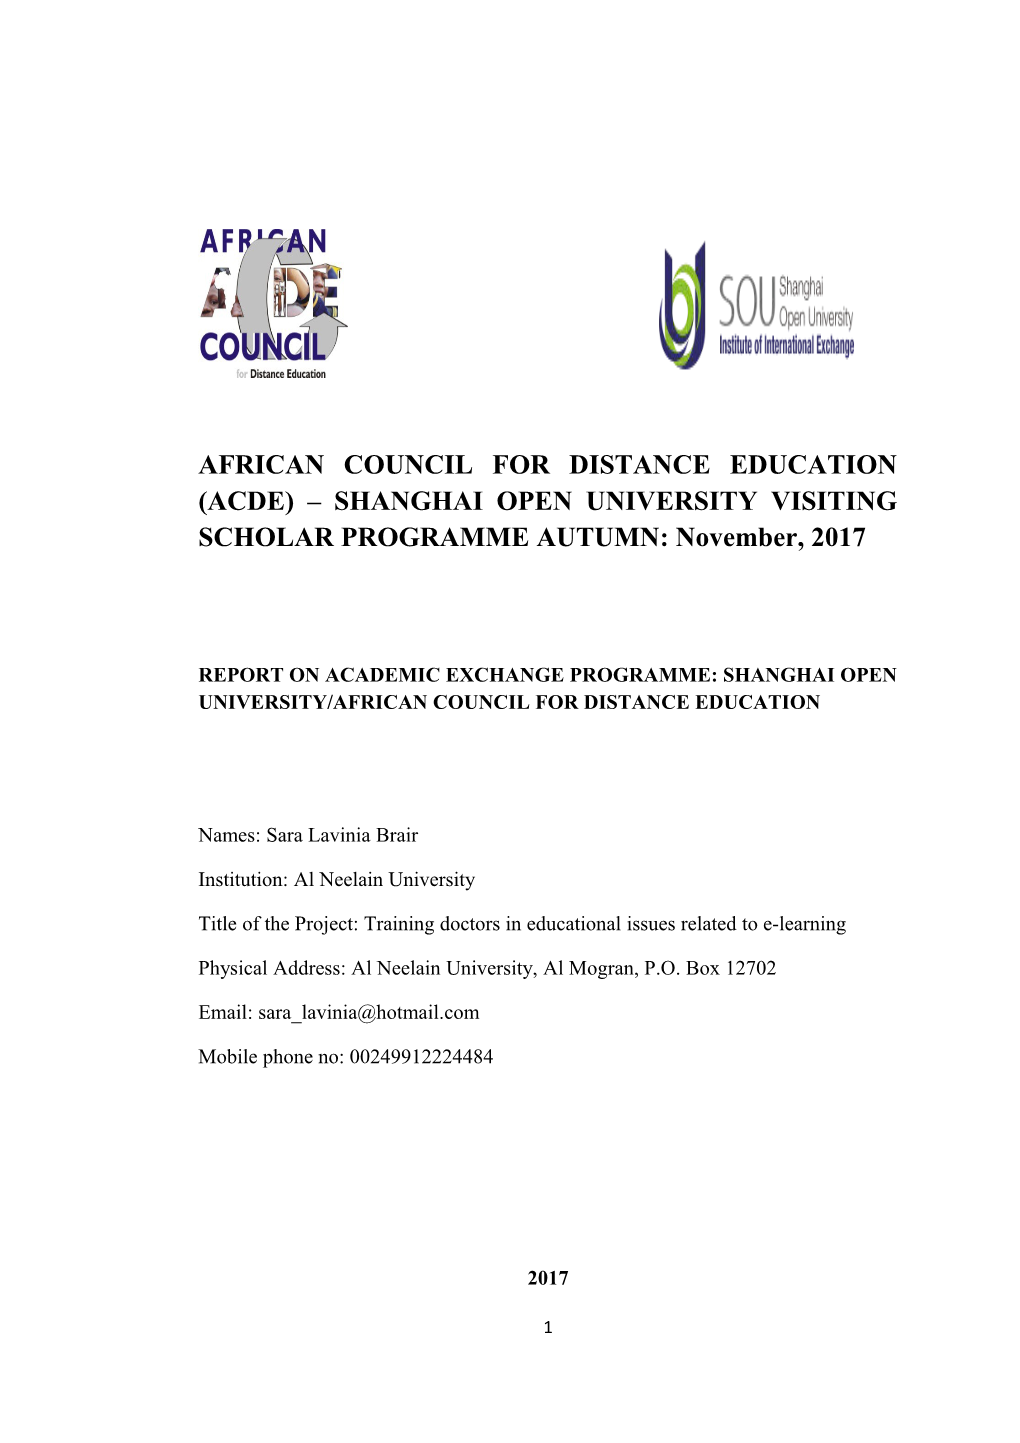 Report on Academic Exchange Programme: Shanghai Open University/African Council for Distance